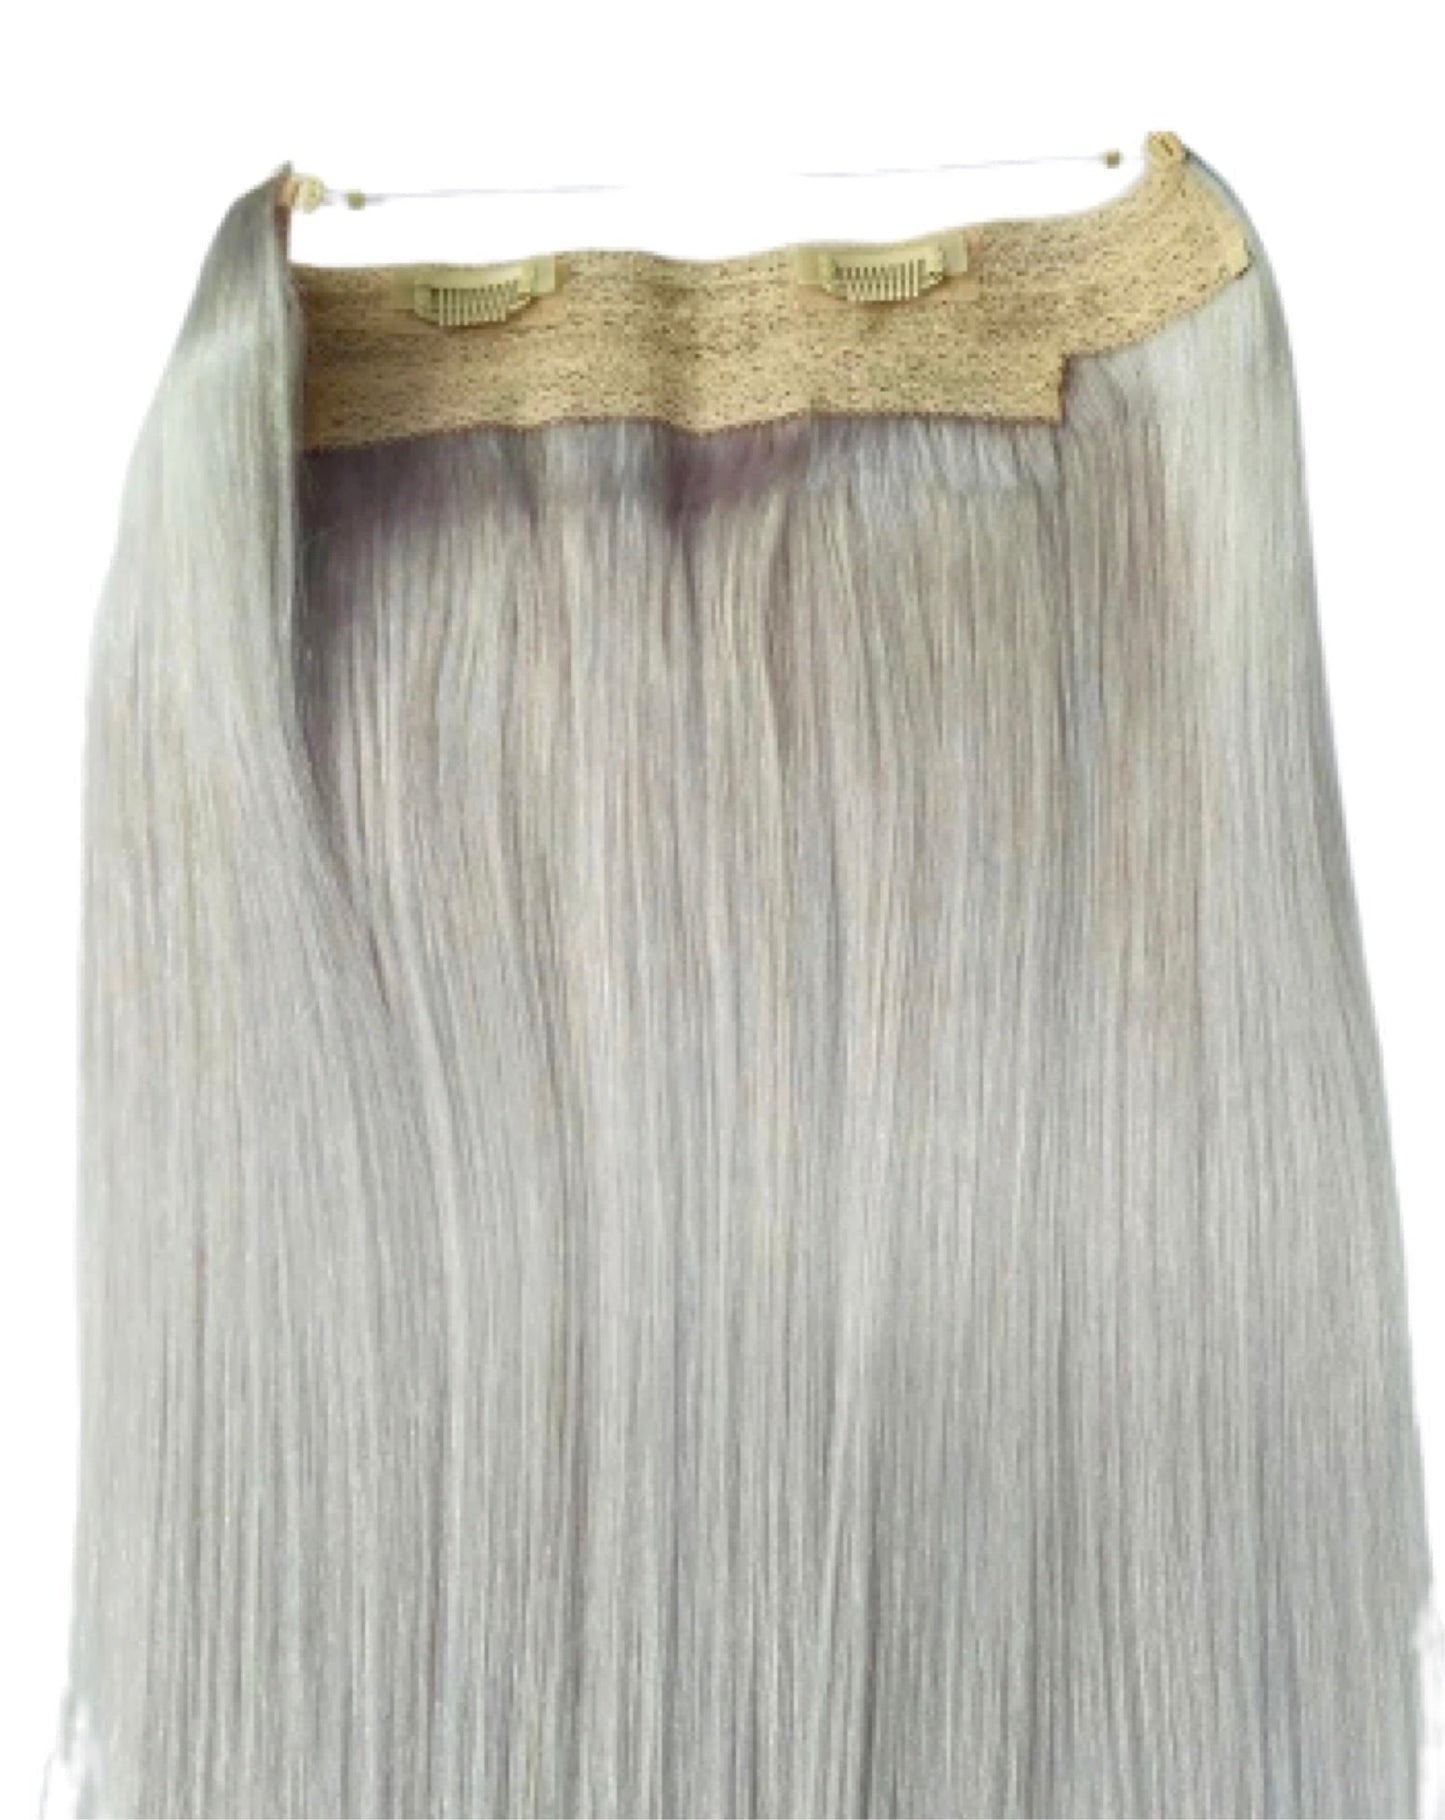 RETAIL HALO EXTENSIONS - NATURAL - OFF BLACK